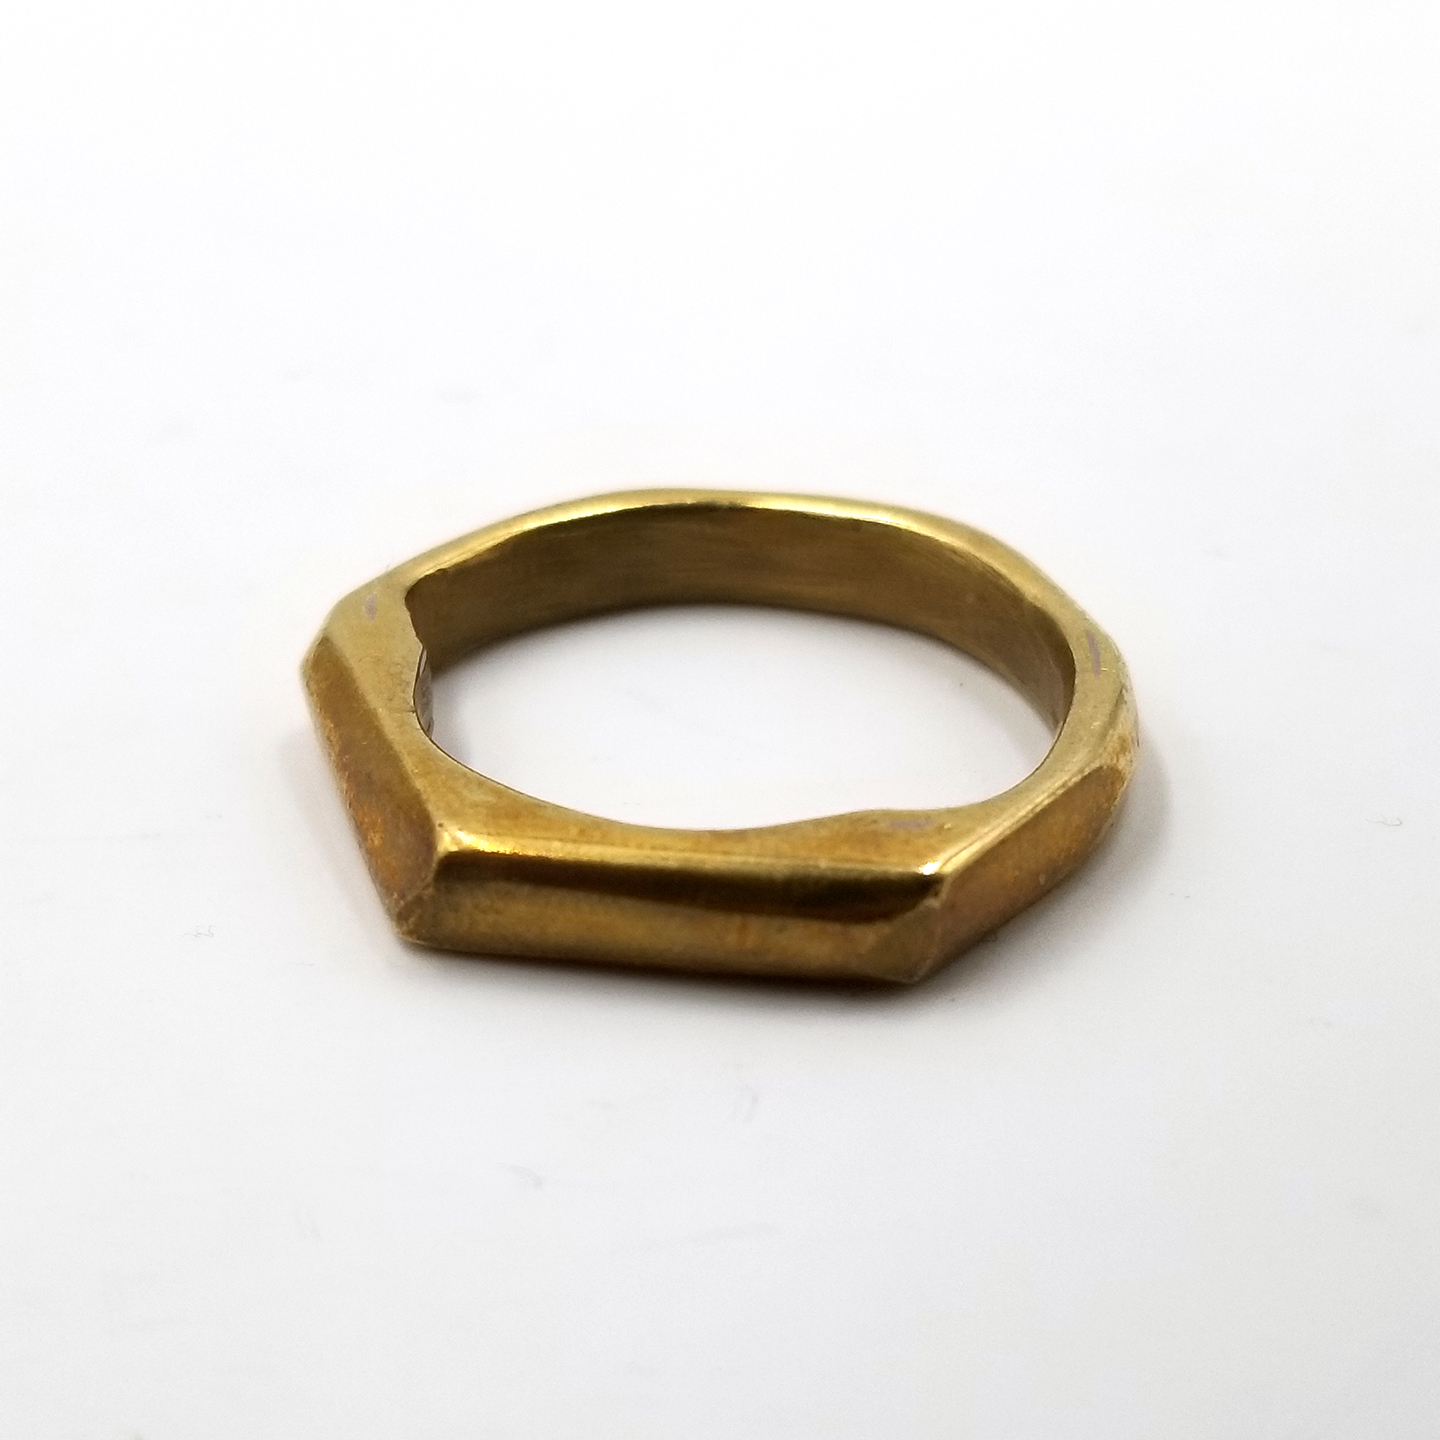 Spherical brass ring with angled edges